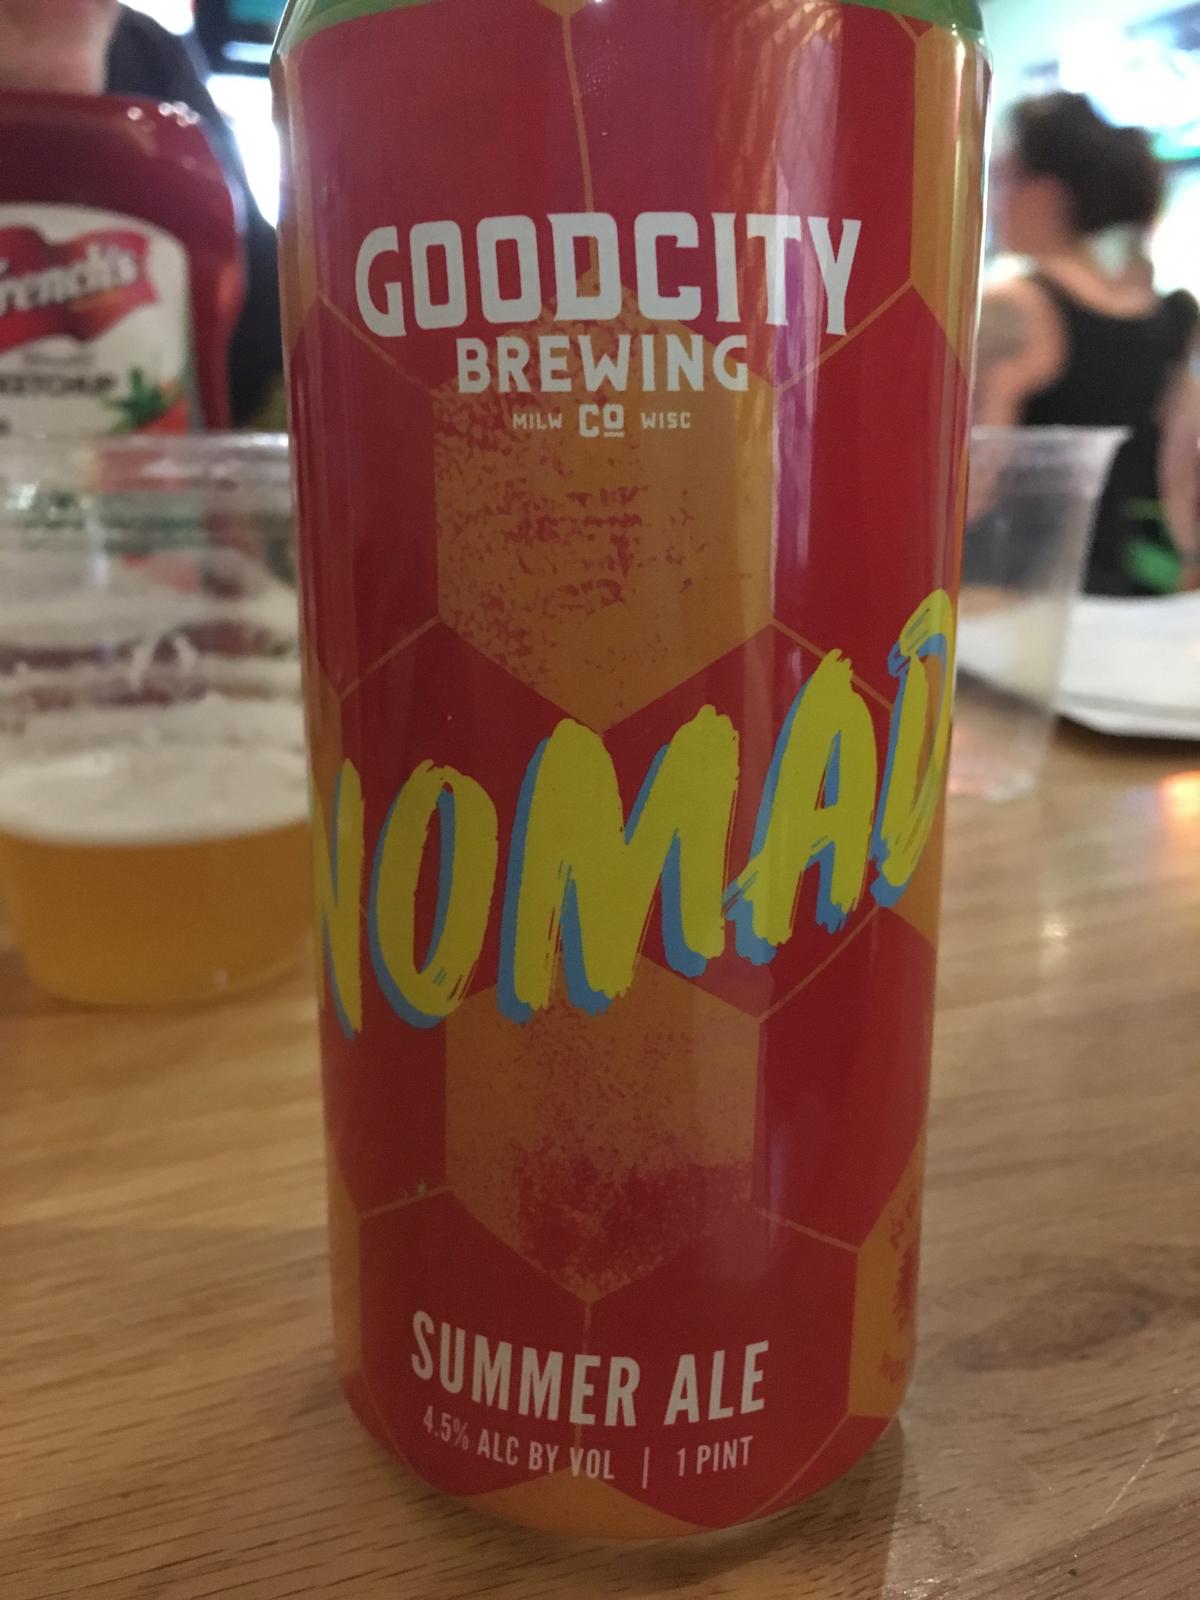 Nomad Summer Ale (Collaboration with Goodcity)